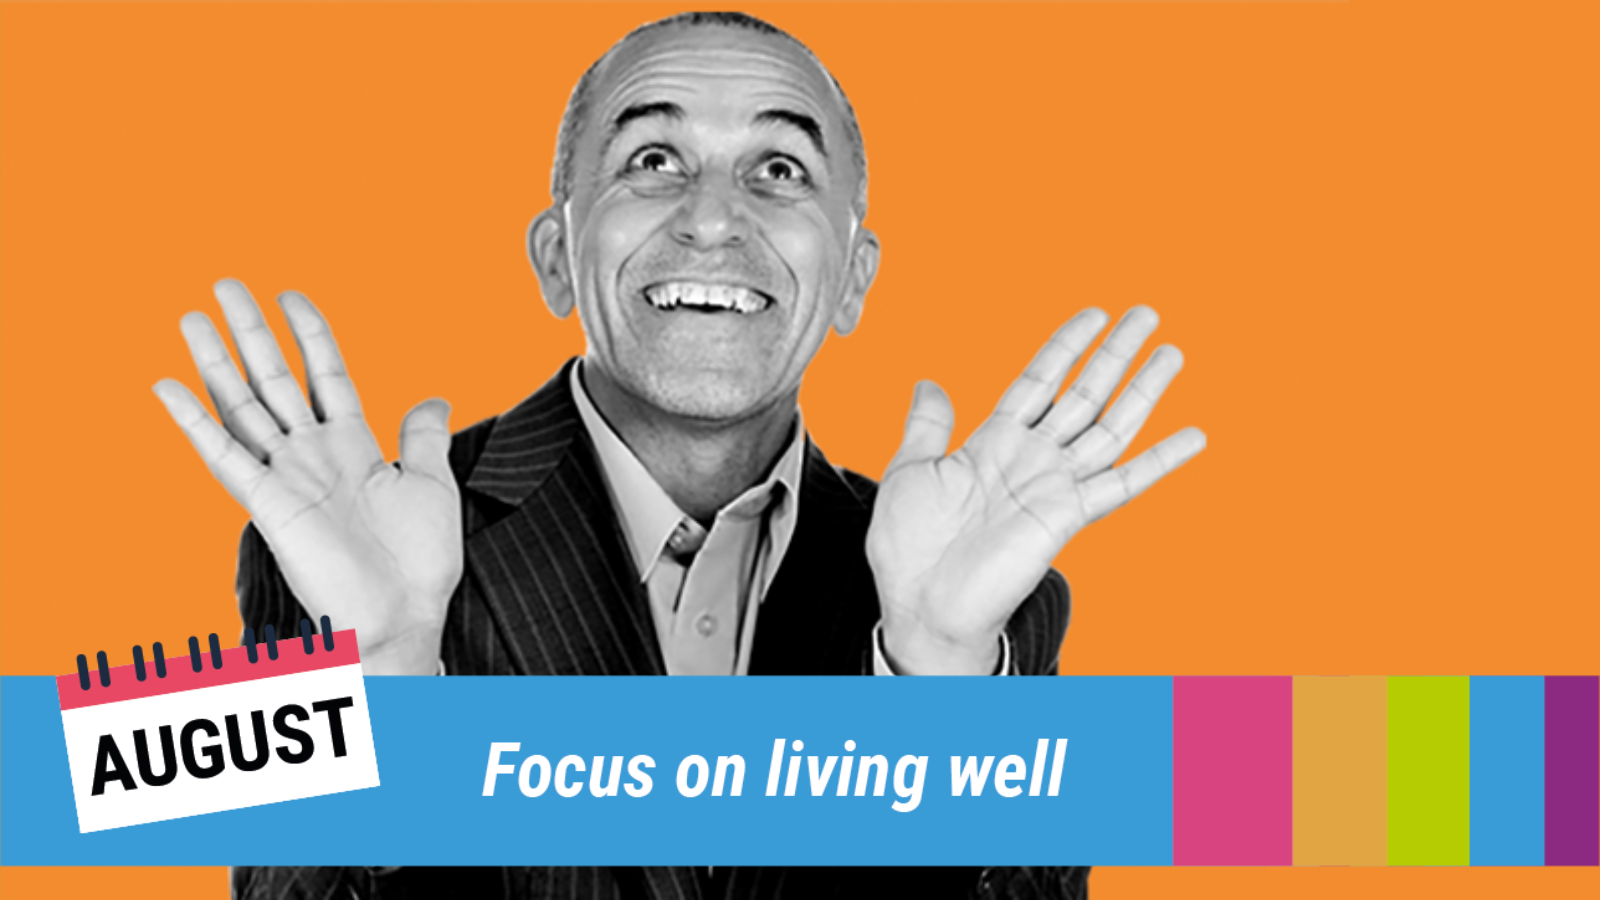 A man looking happy on an orange background with the text 'Focus on living well'